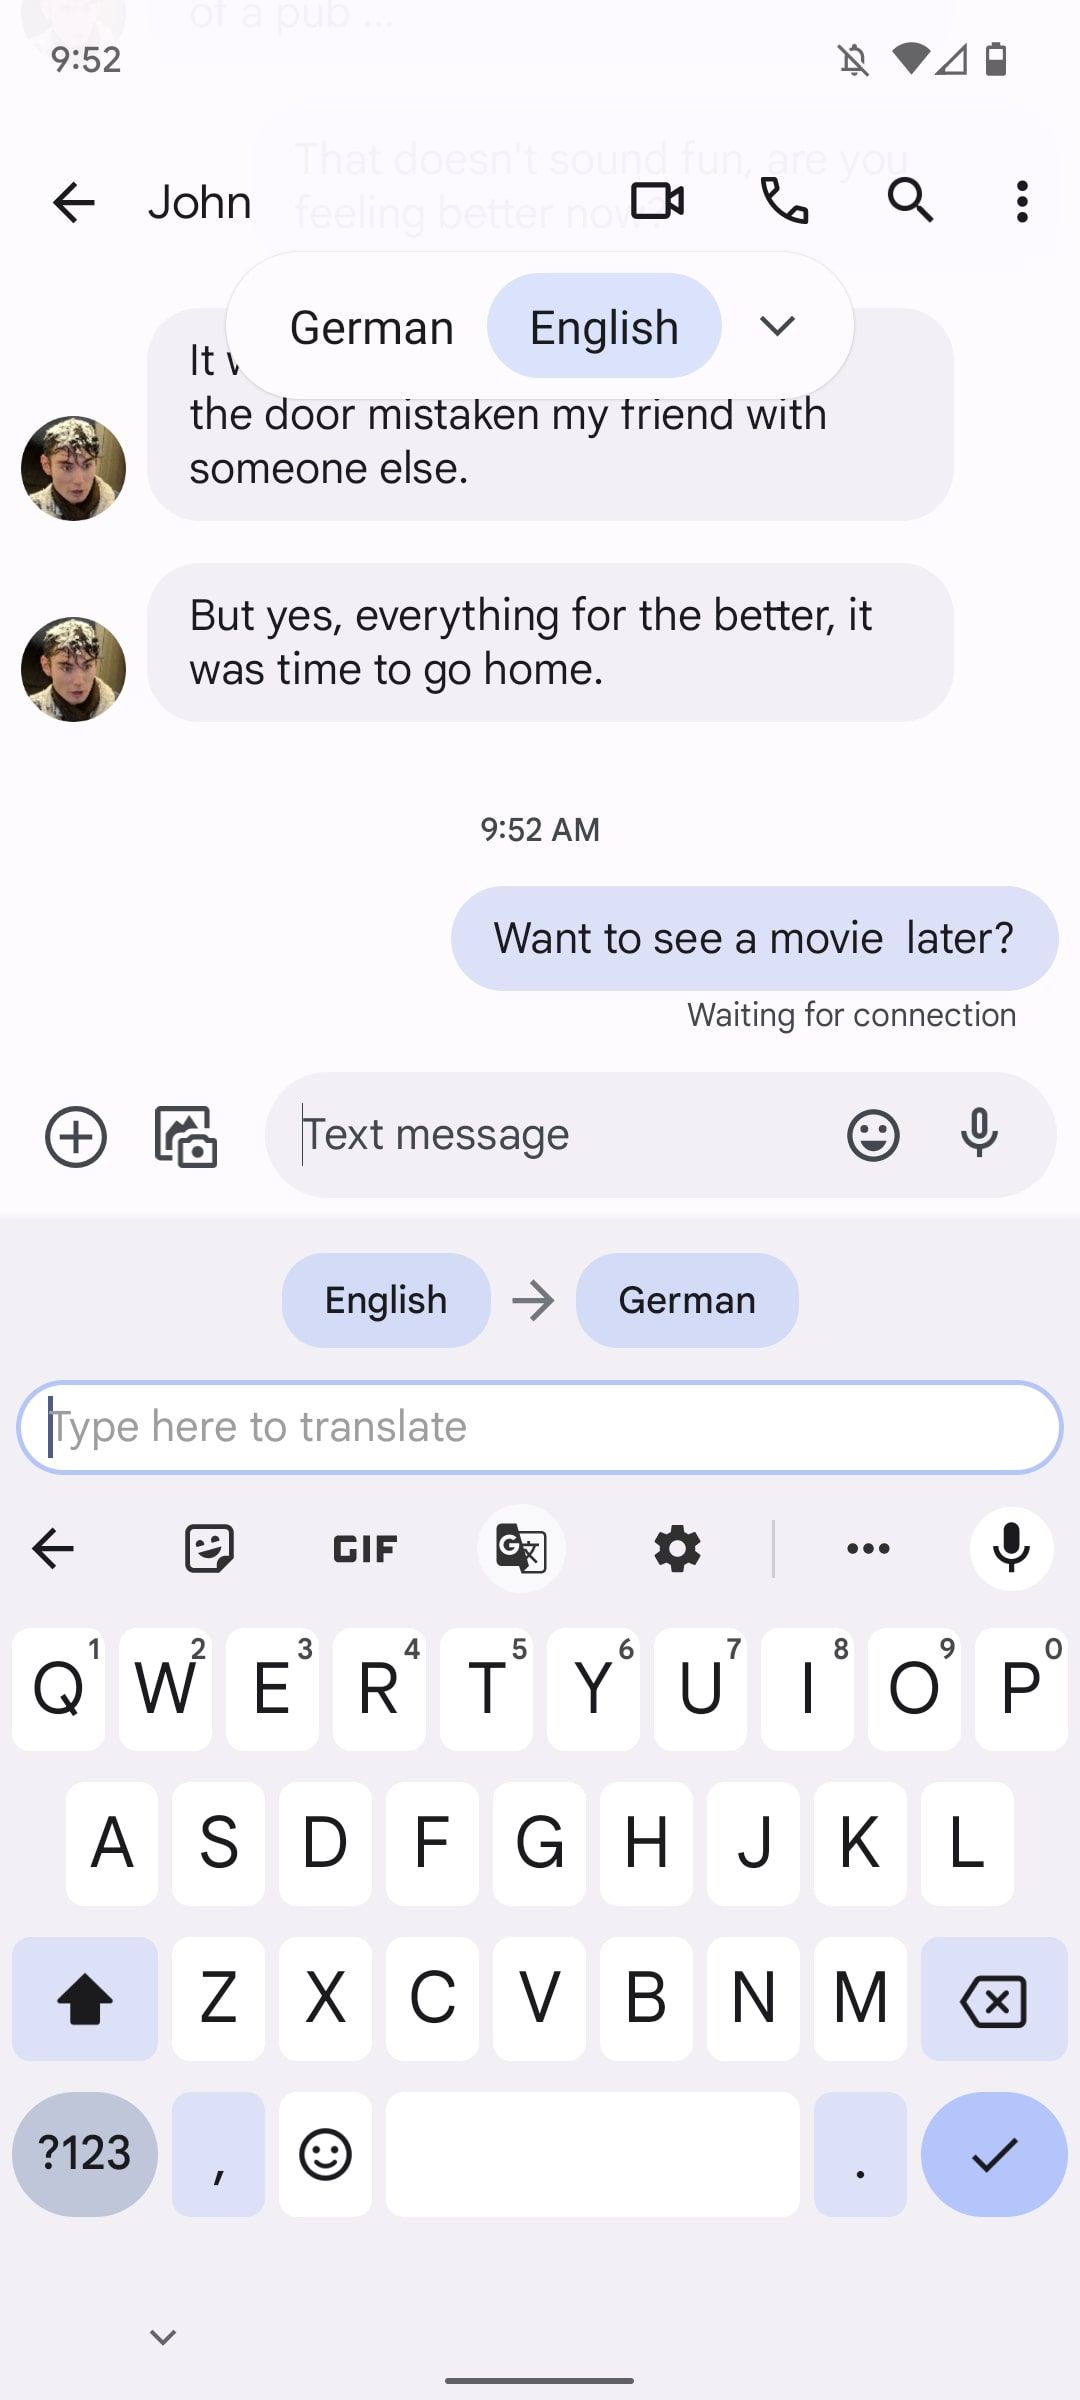 A text message conversation showing text being converted from English to German.